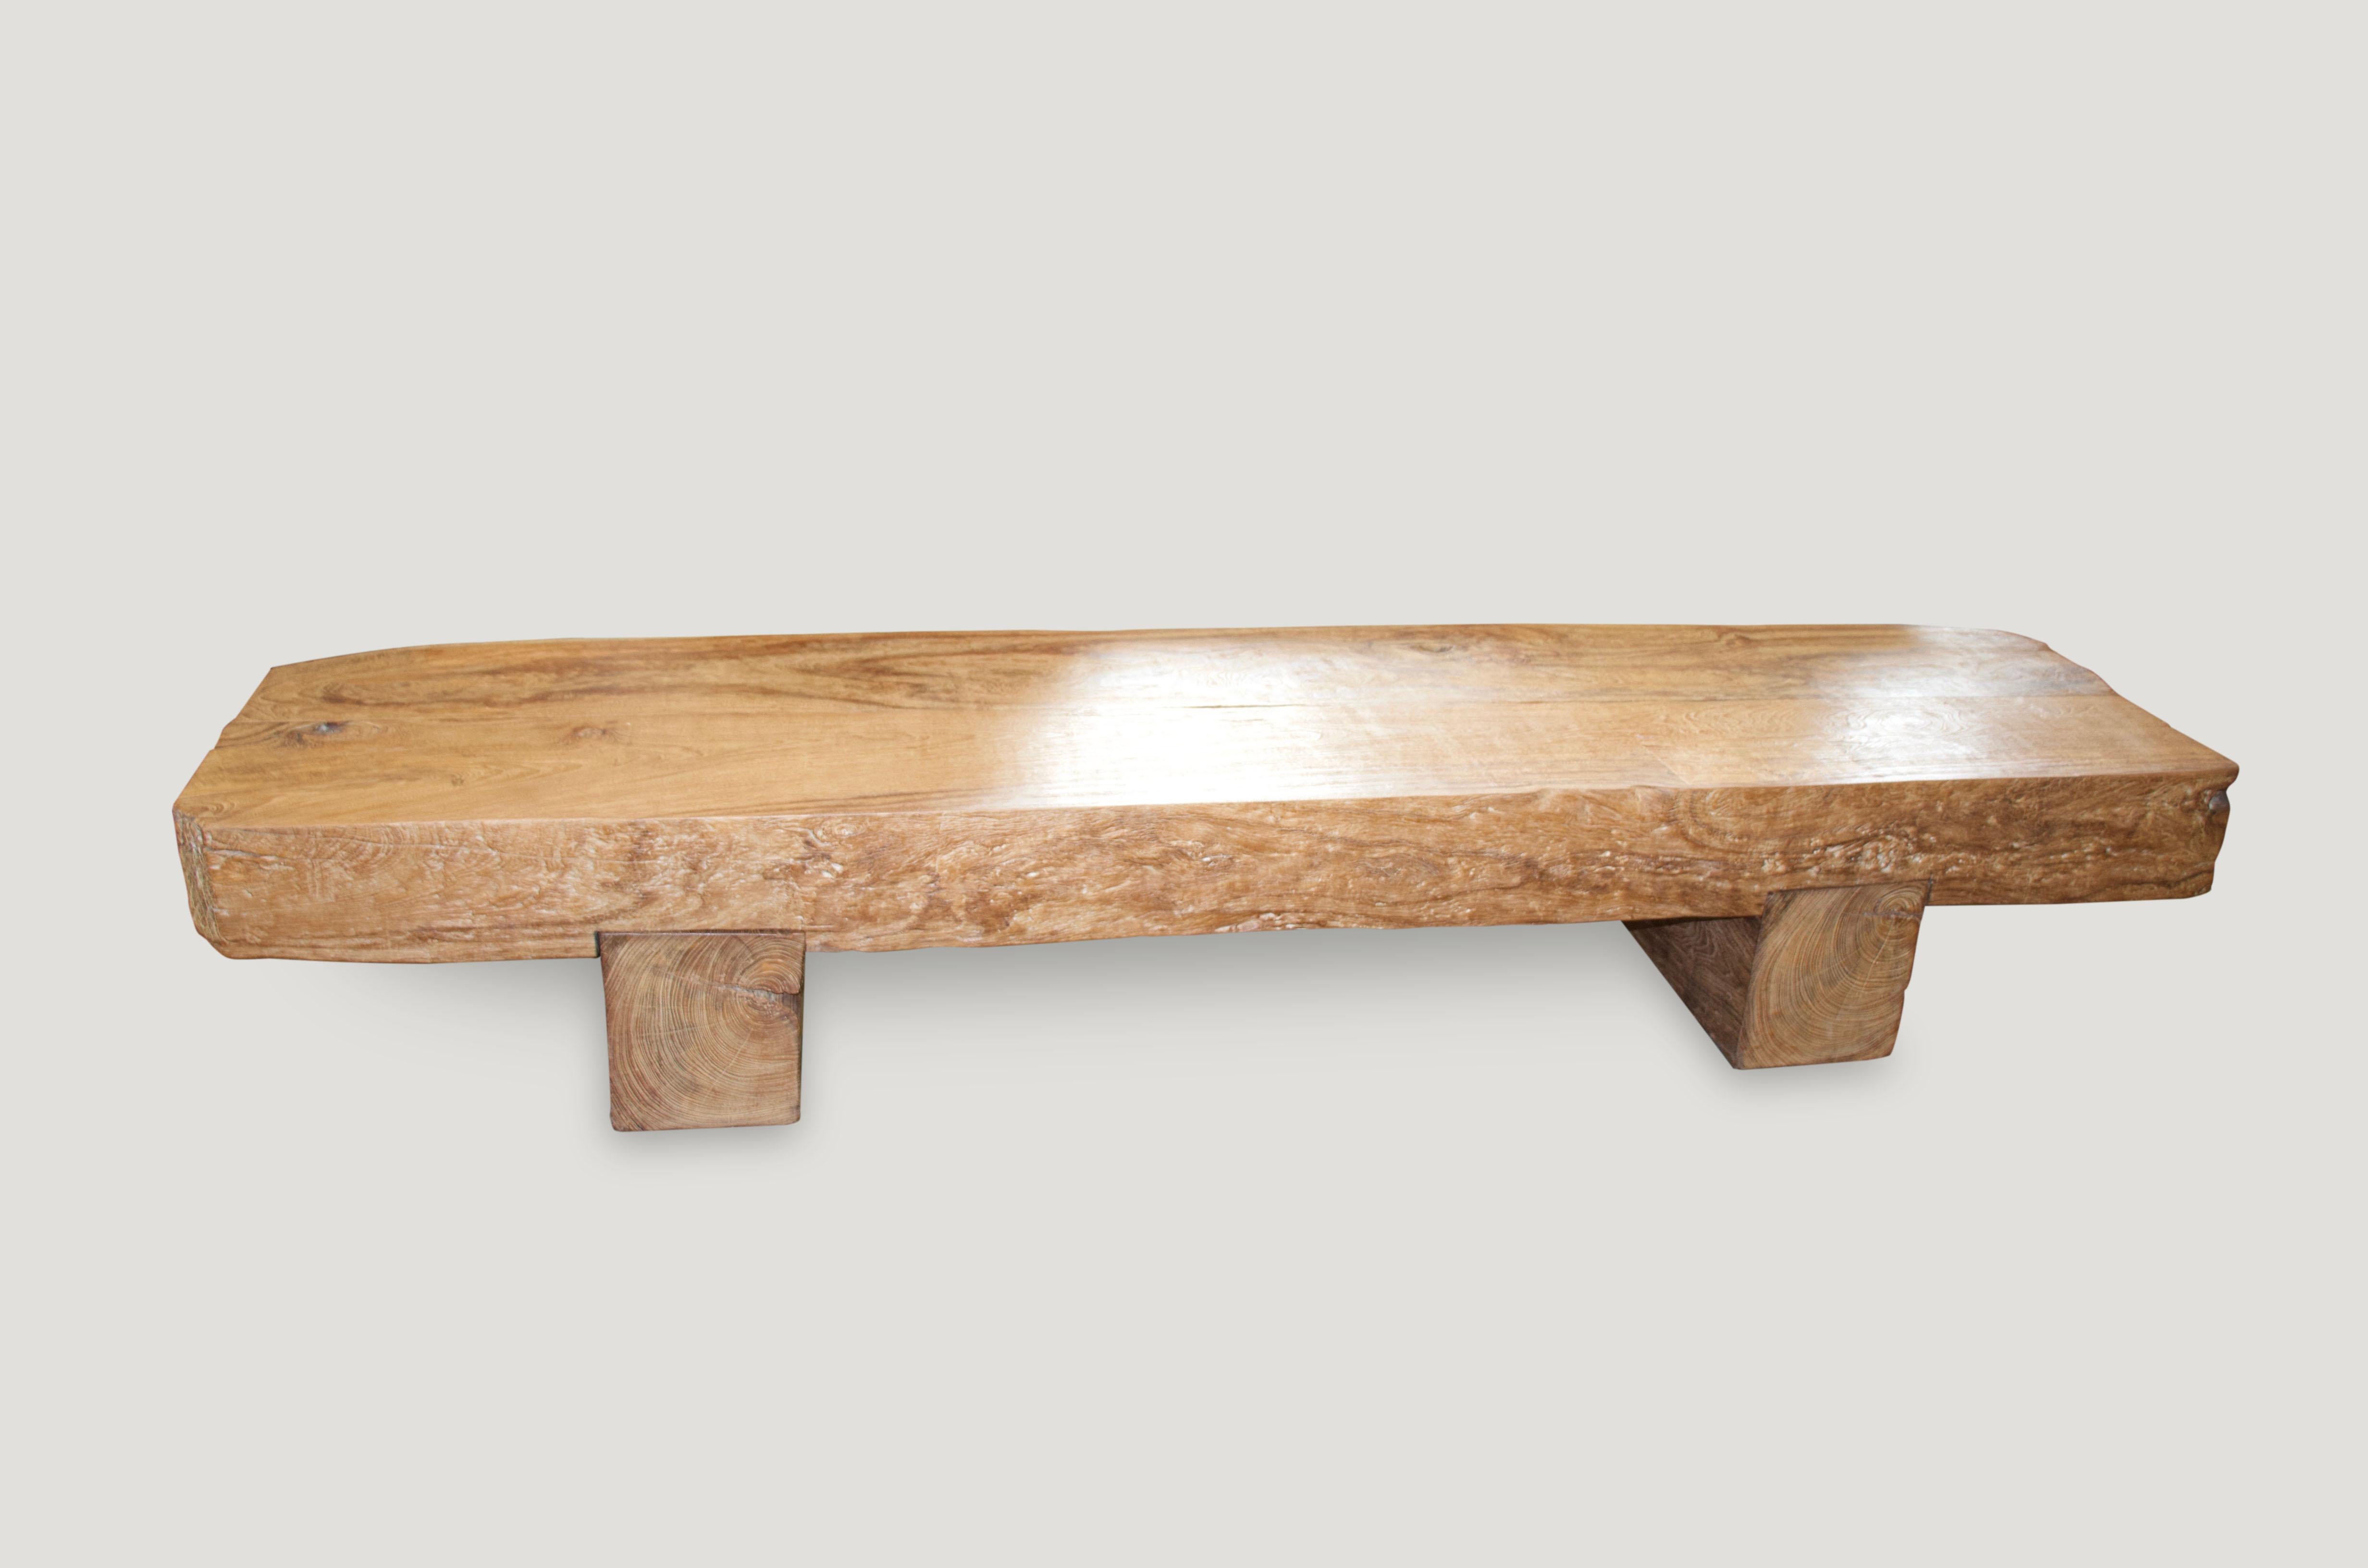 Beautiful natural reclaimed teak wood coffee table or bench with stunning patina. Two 7.5” thick teak wood slabs make this an impressive piece. Set on modern legs.

We can custom the legs for a dining table or console if preferred. Please